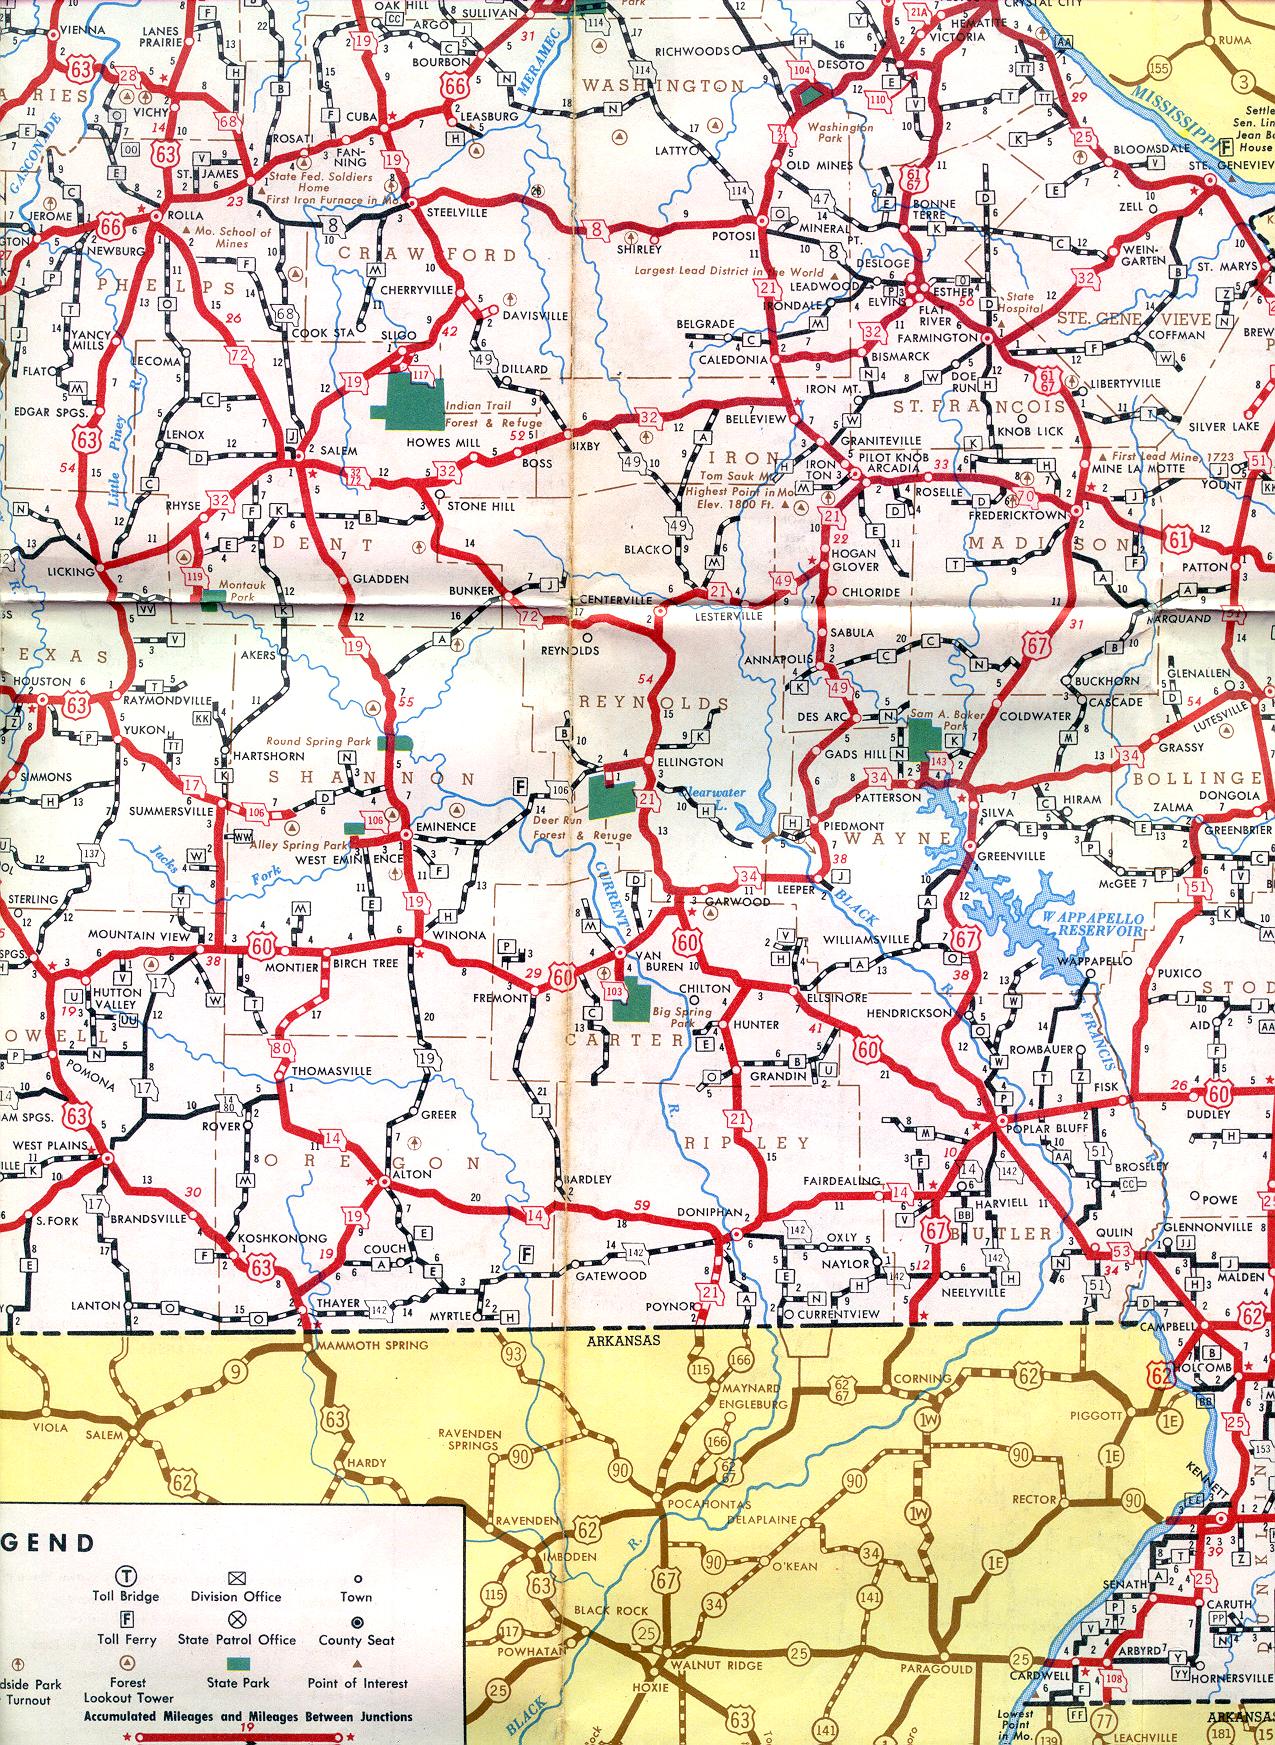 Section of 1952 official highway map for Missouri